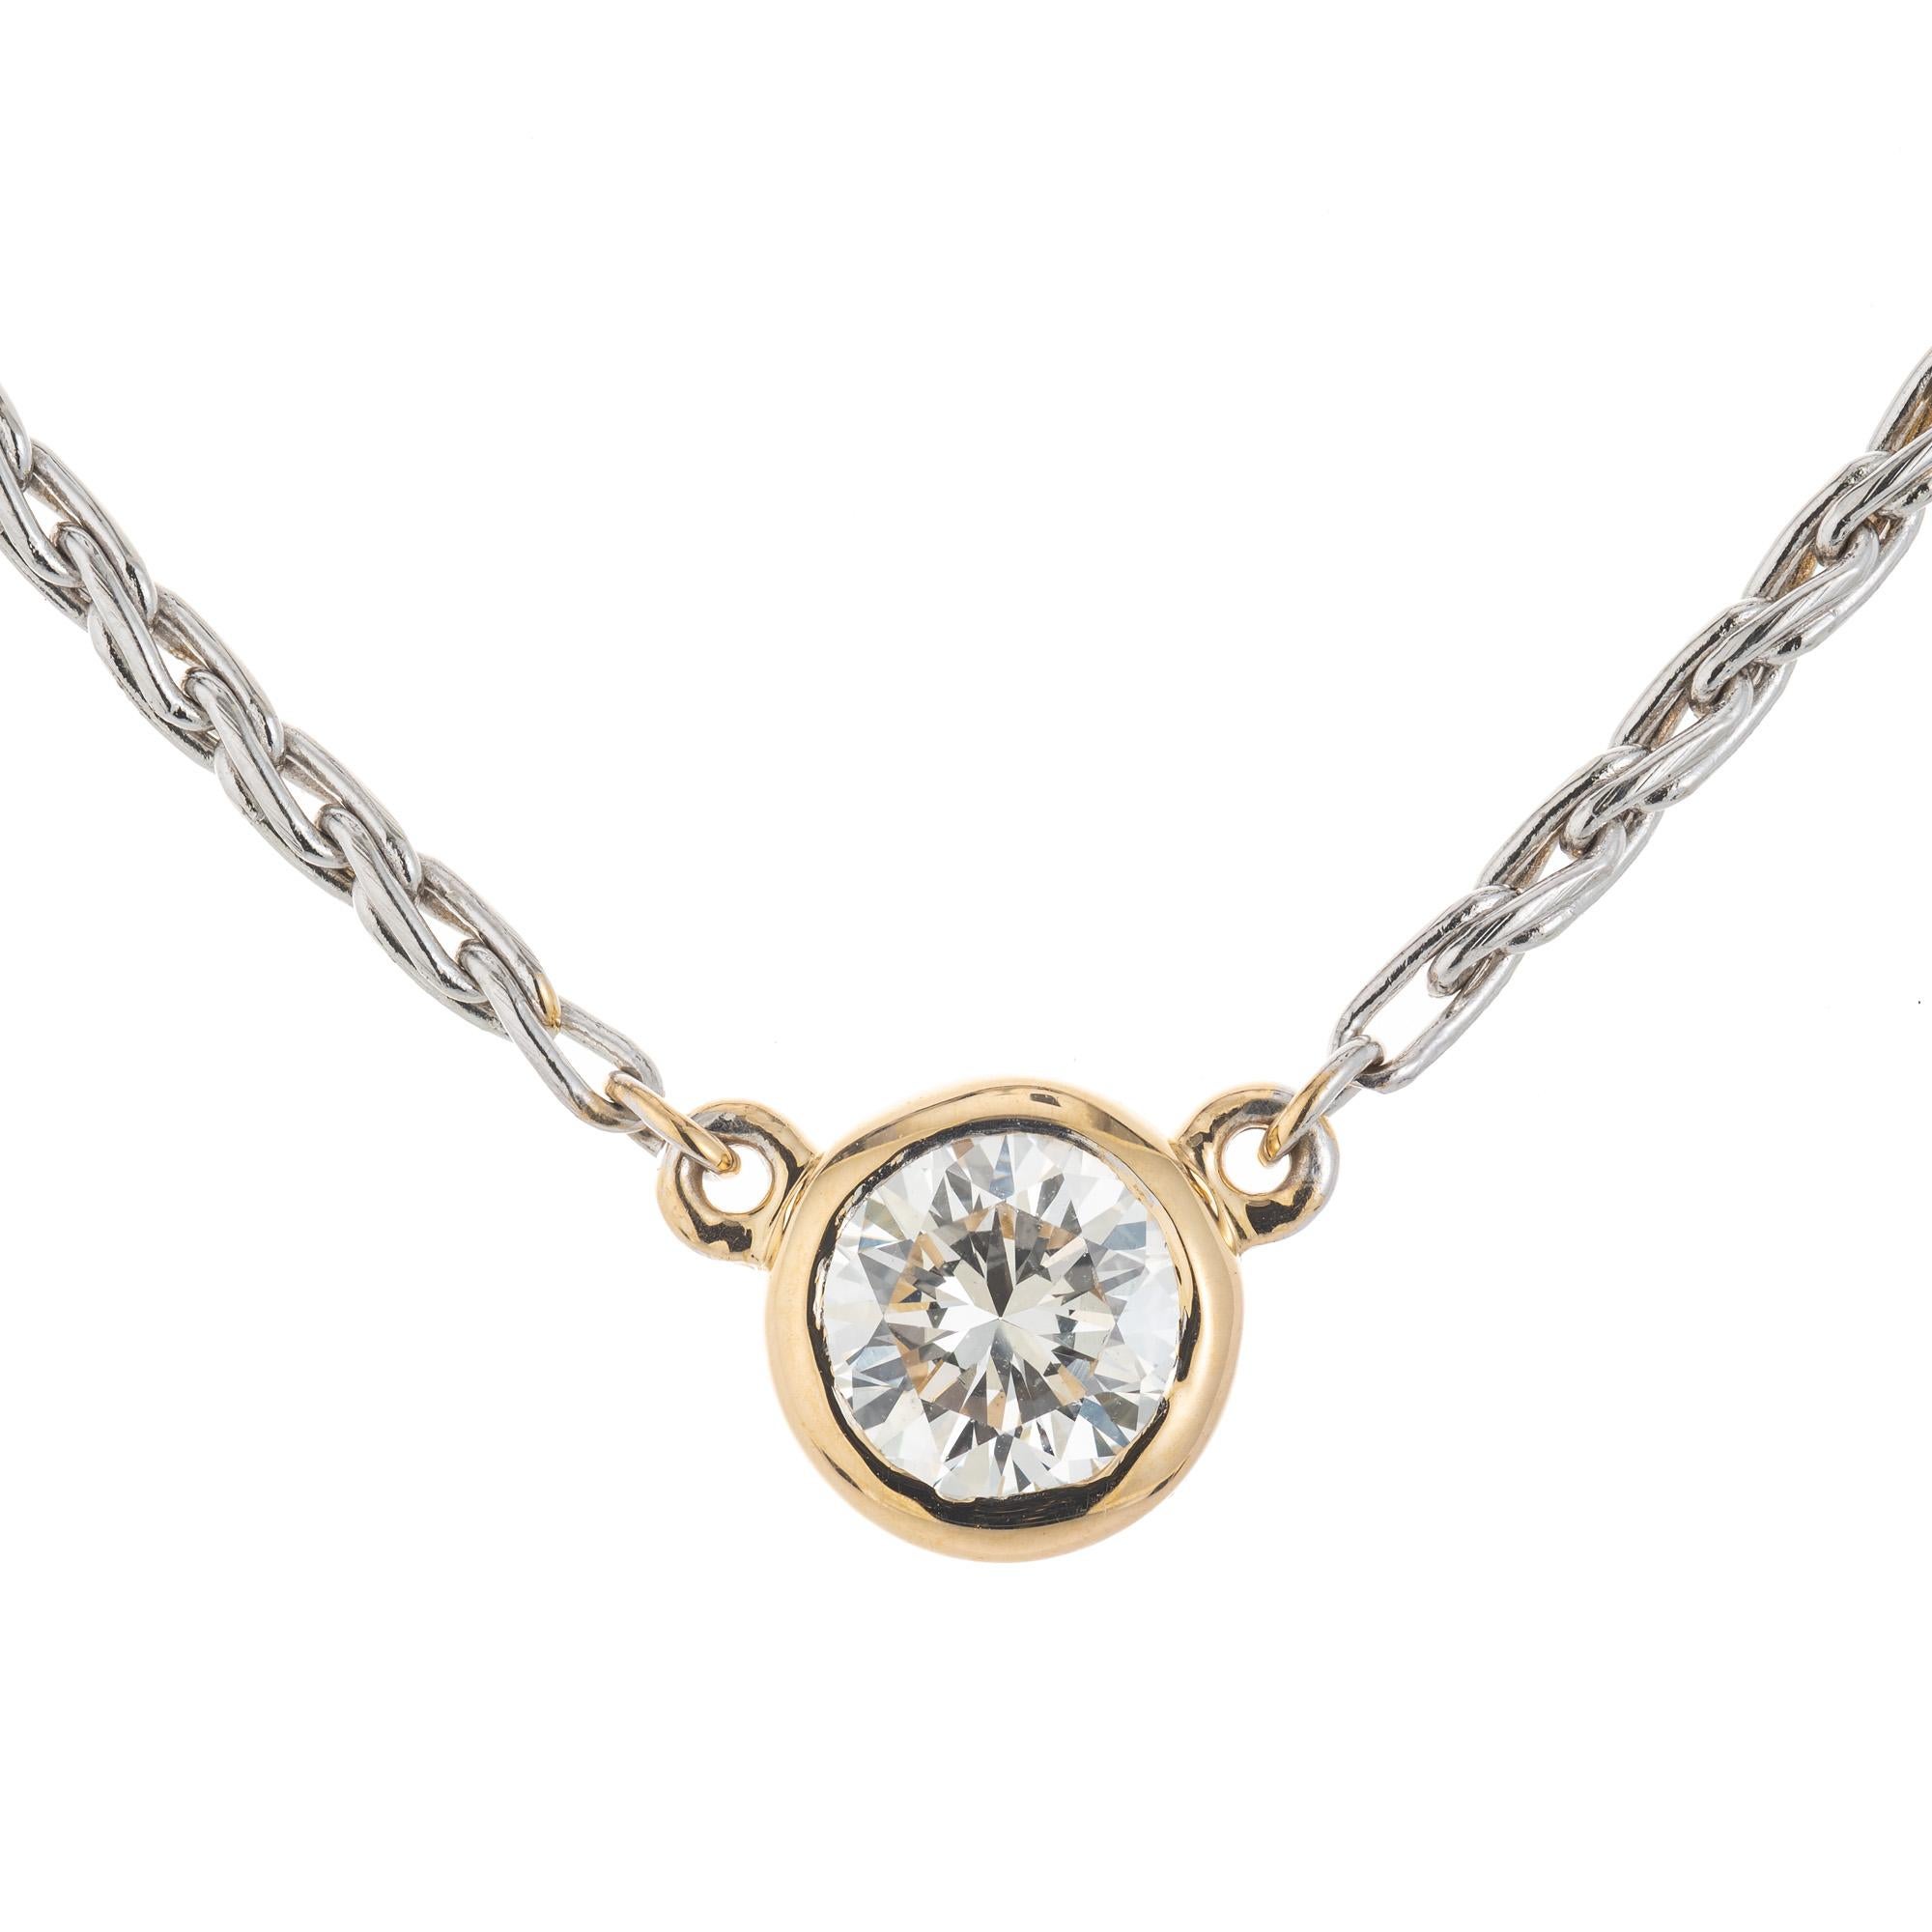 Beautiful and simple, EGL Certified .74 carat round brilliant cut diamond solitaire pendant necklace with a yellow gold bezel and white gold chain. EGL has certified this as I-J, near colorless. Completed with a 16 inch 14k white gold chain.  

1